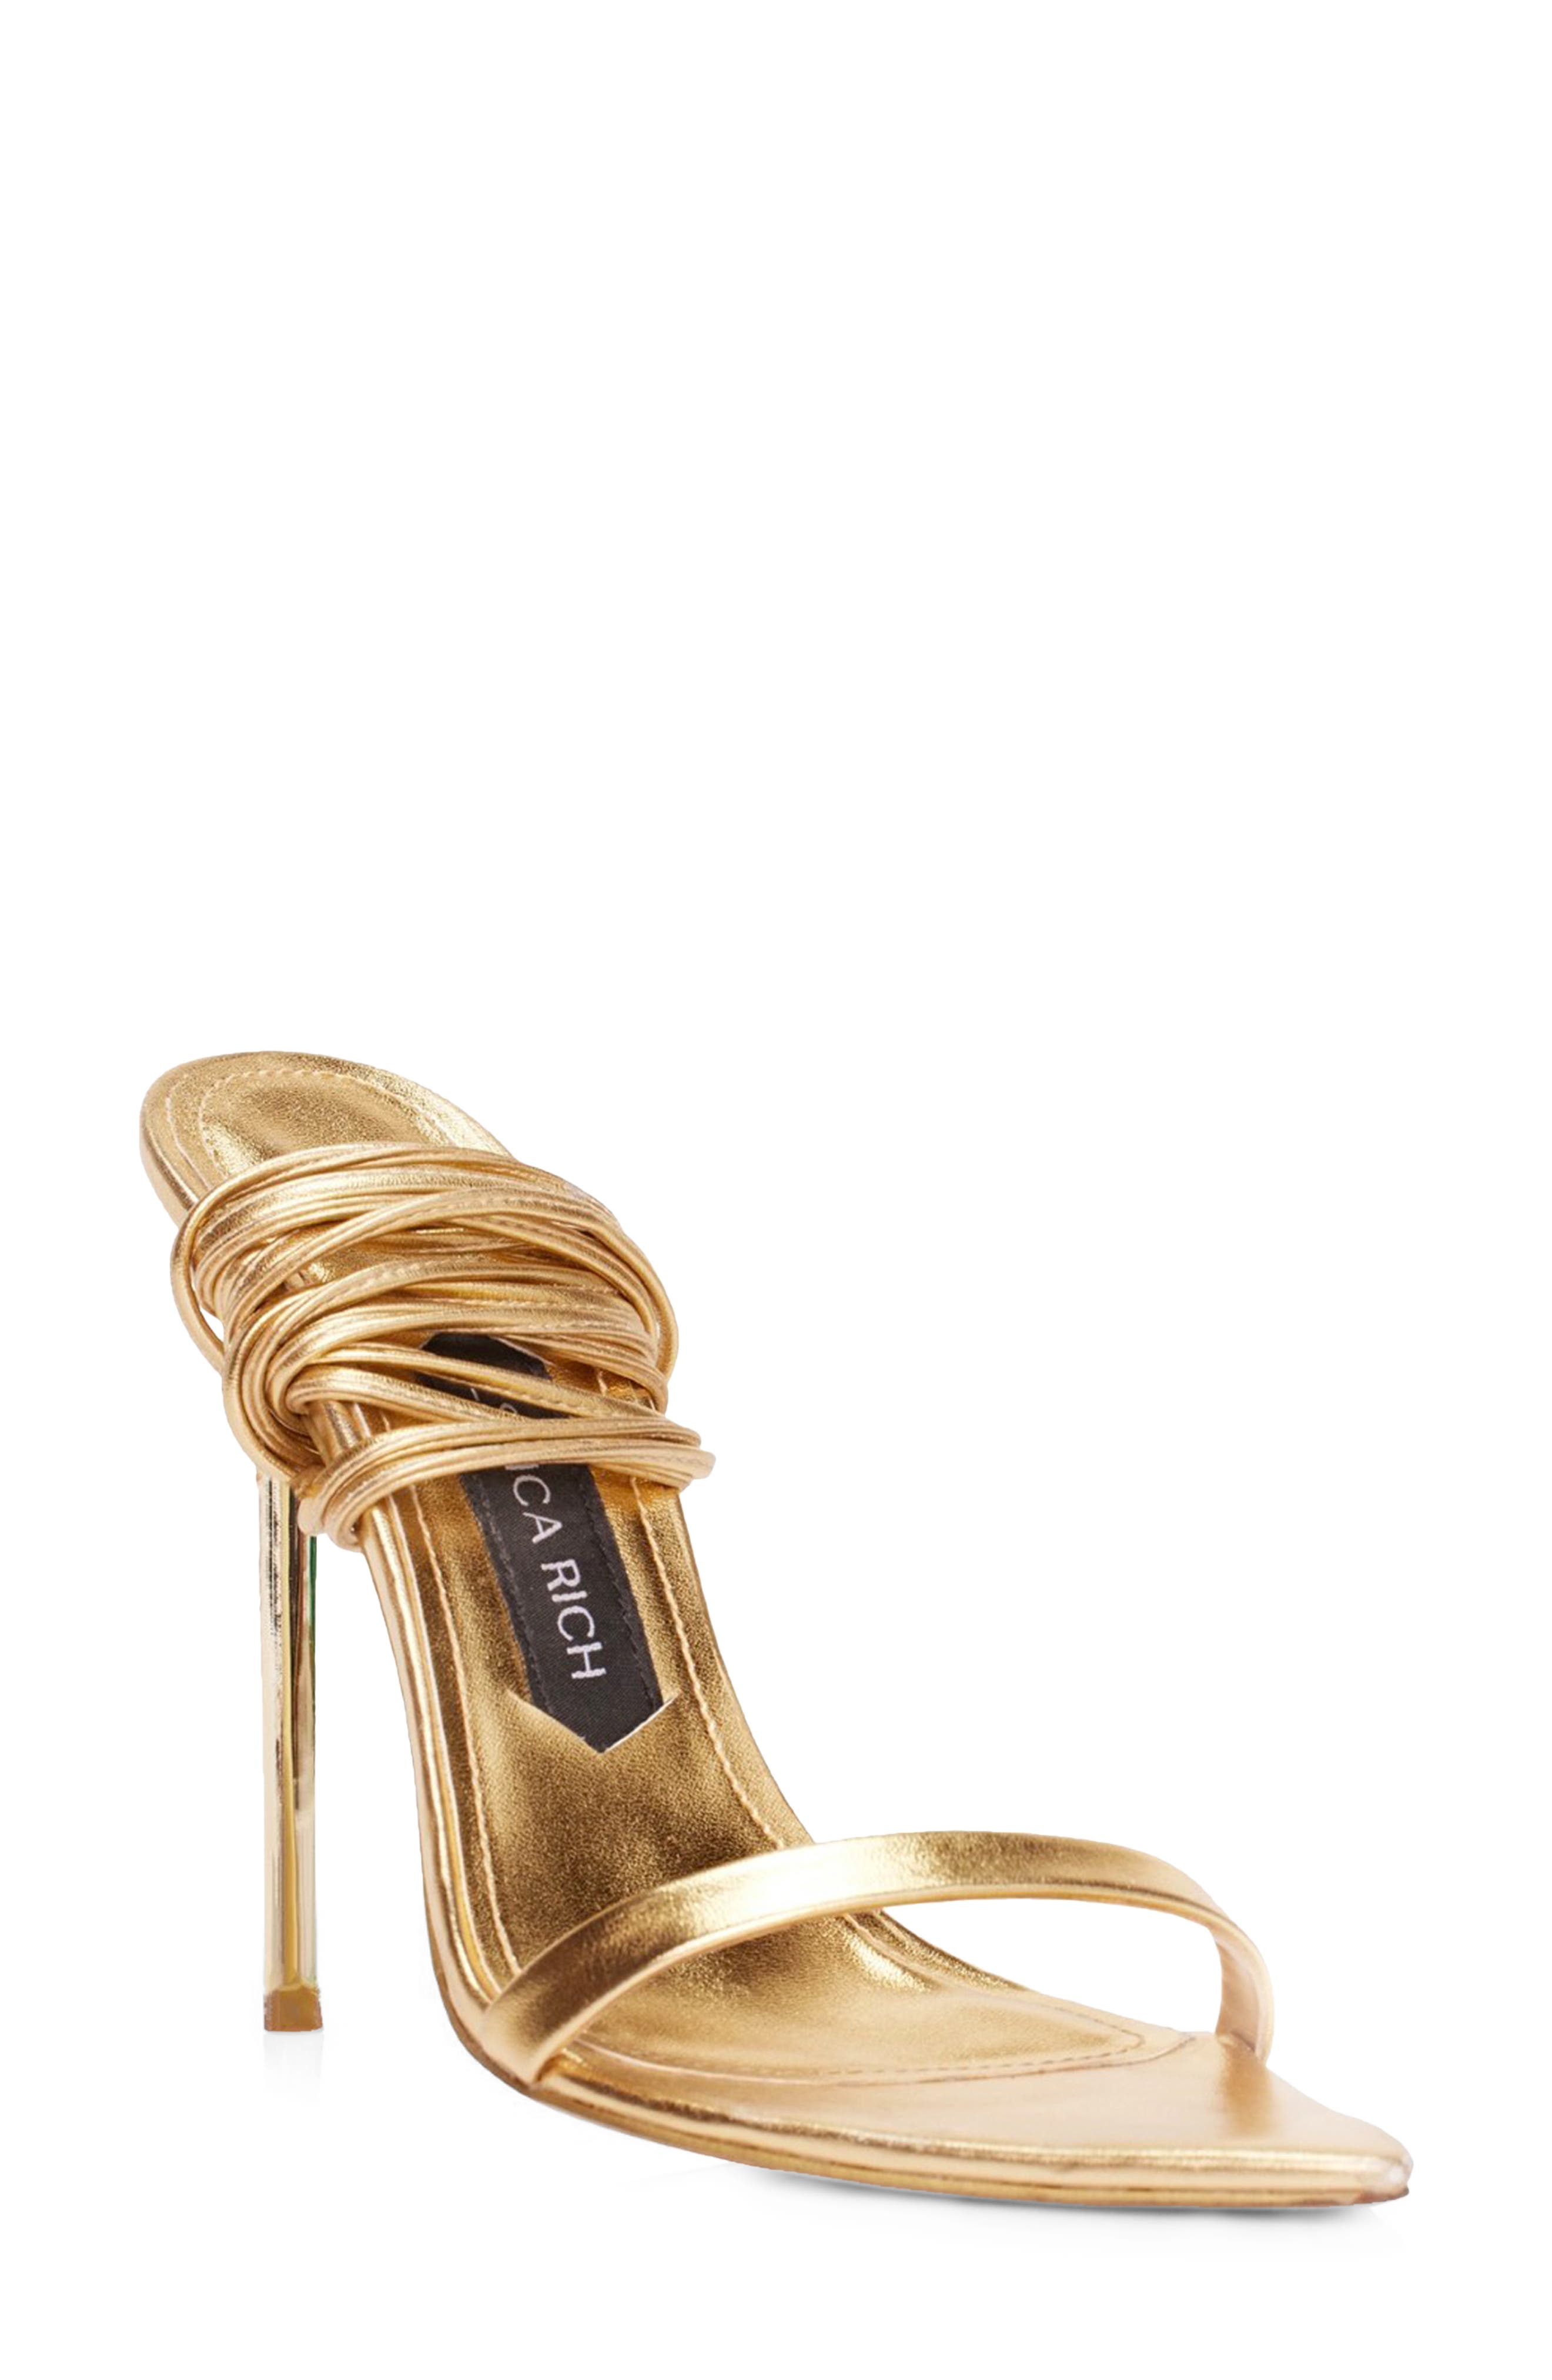 JESSICA RICH Ankle Strap Sandal in Gold at Nordstrom